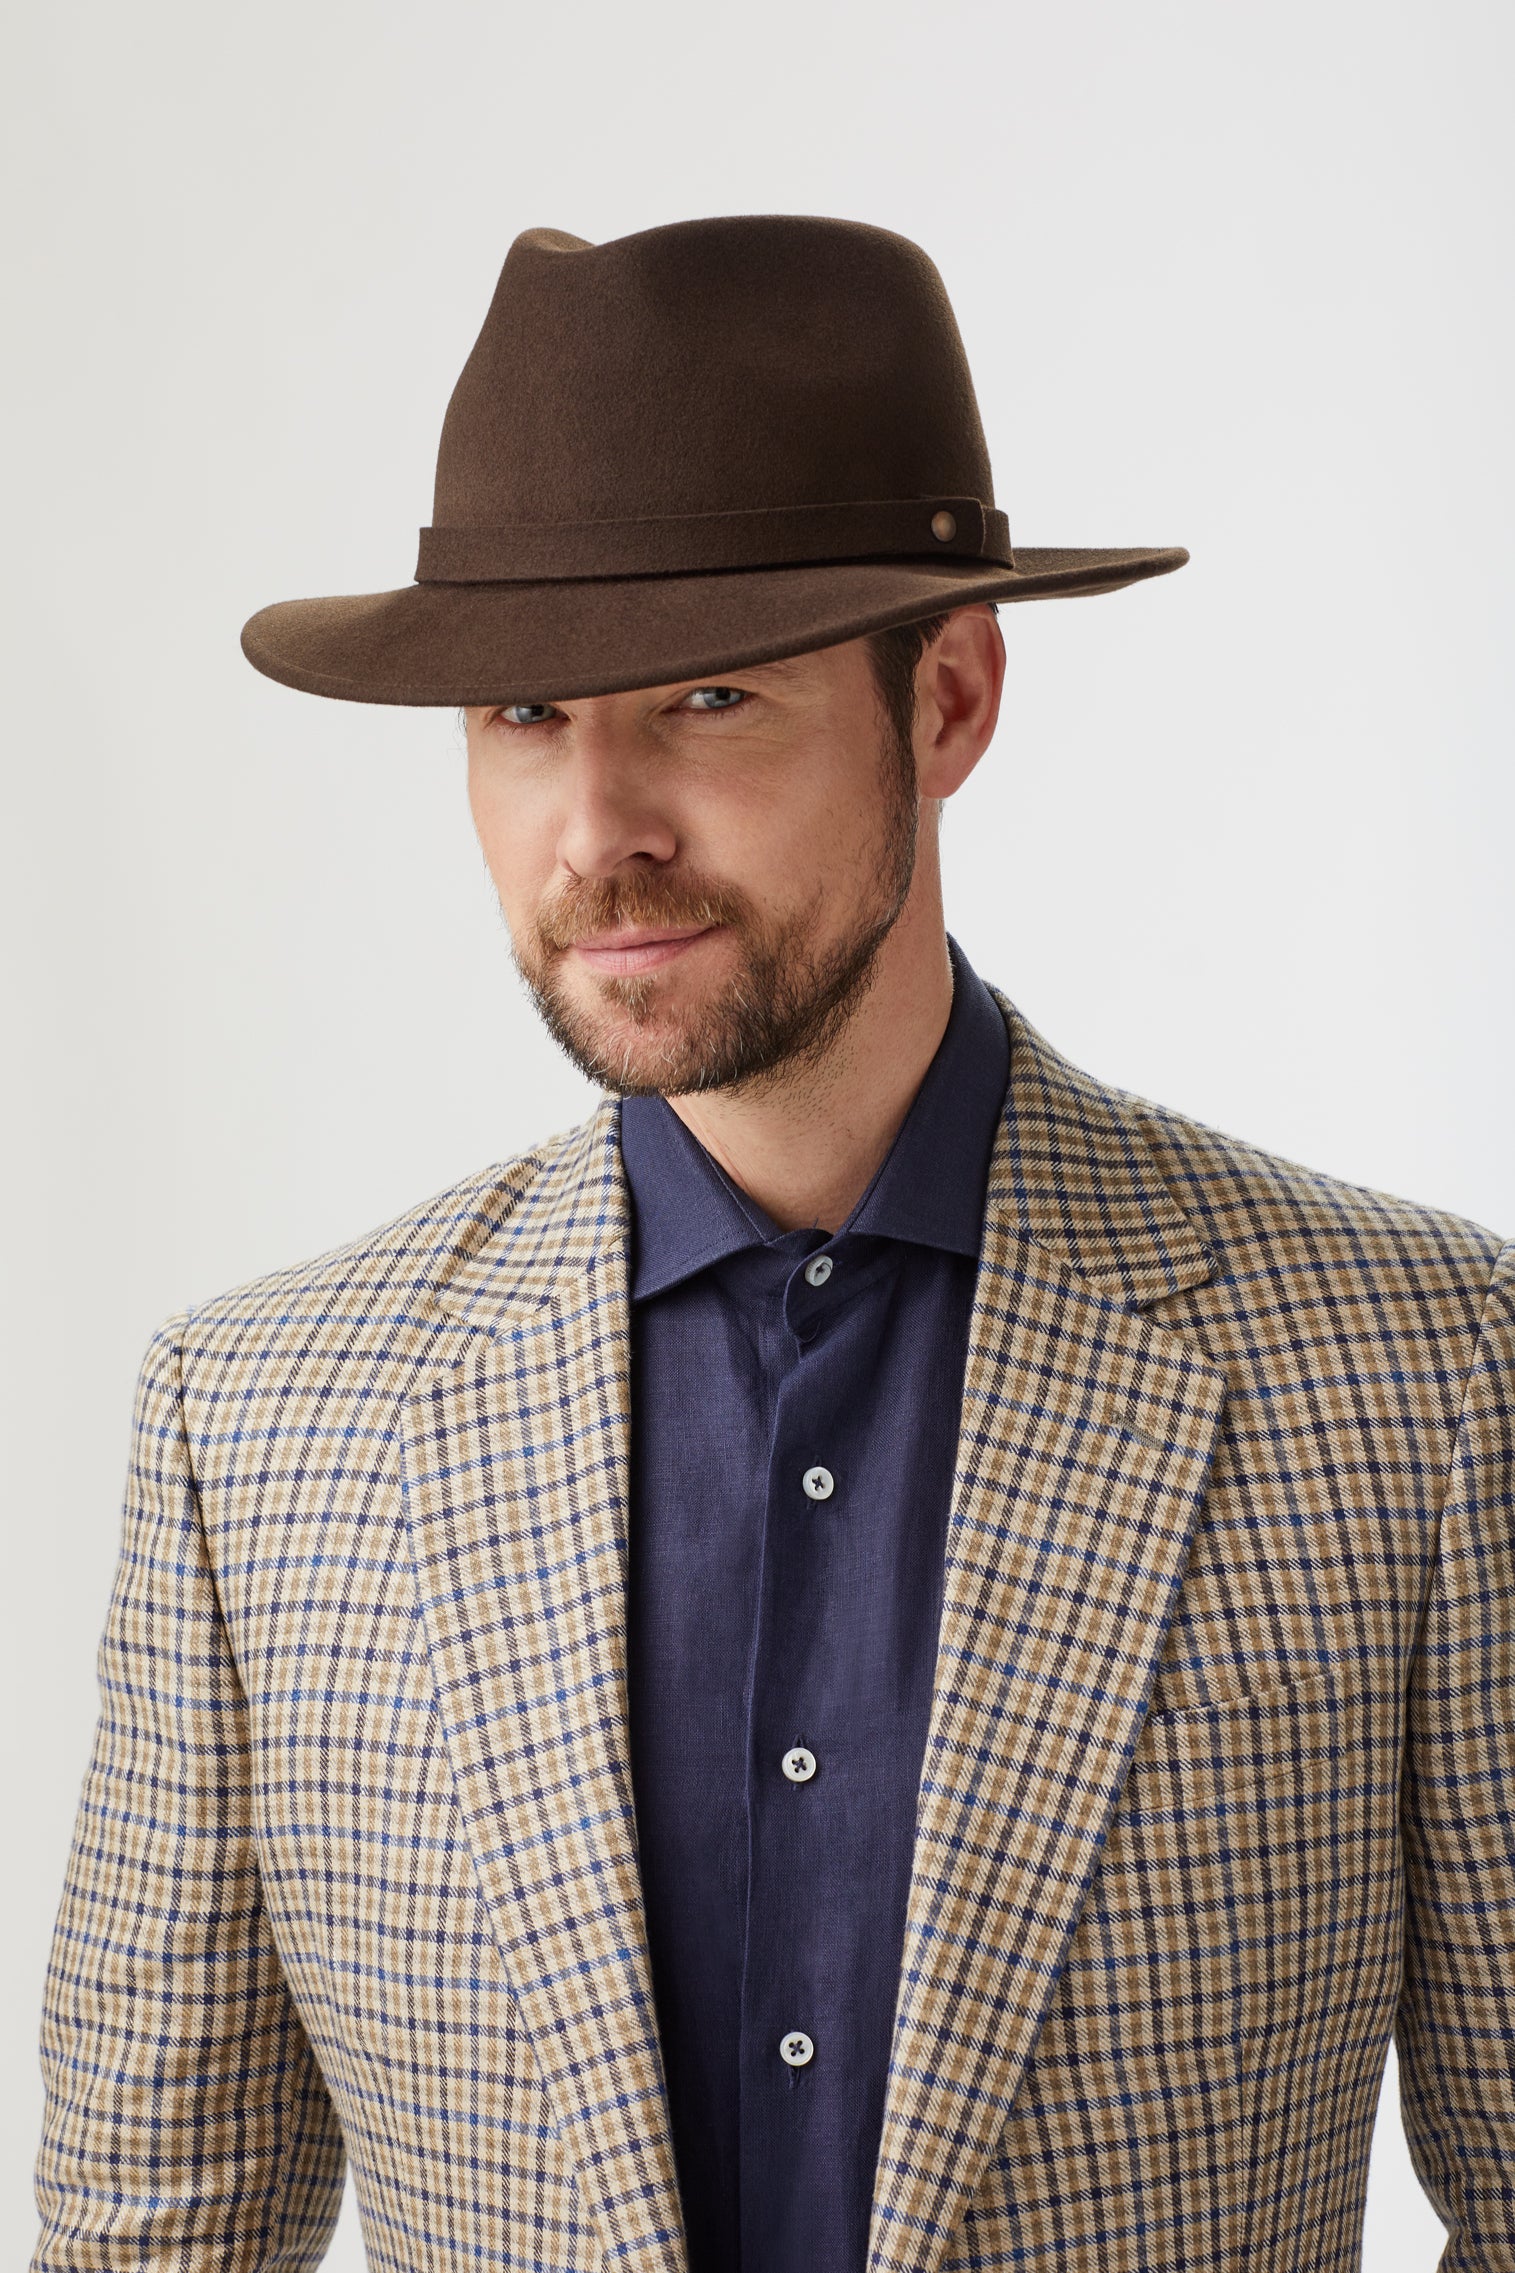 Nomad Rollable Trilby - Men's Trilbies and Porkpies - Lock & Co. Hatters London UK